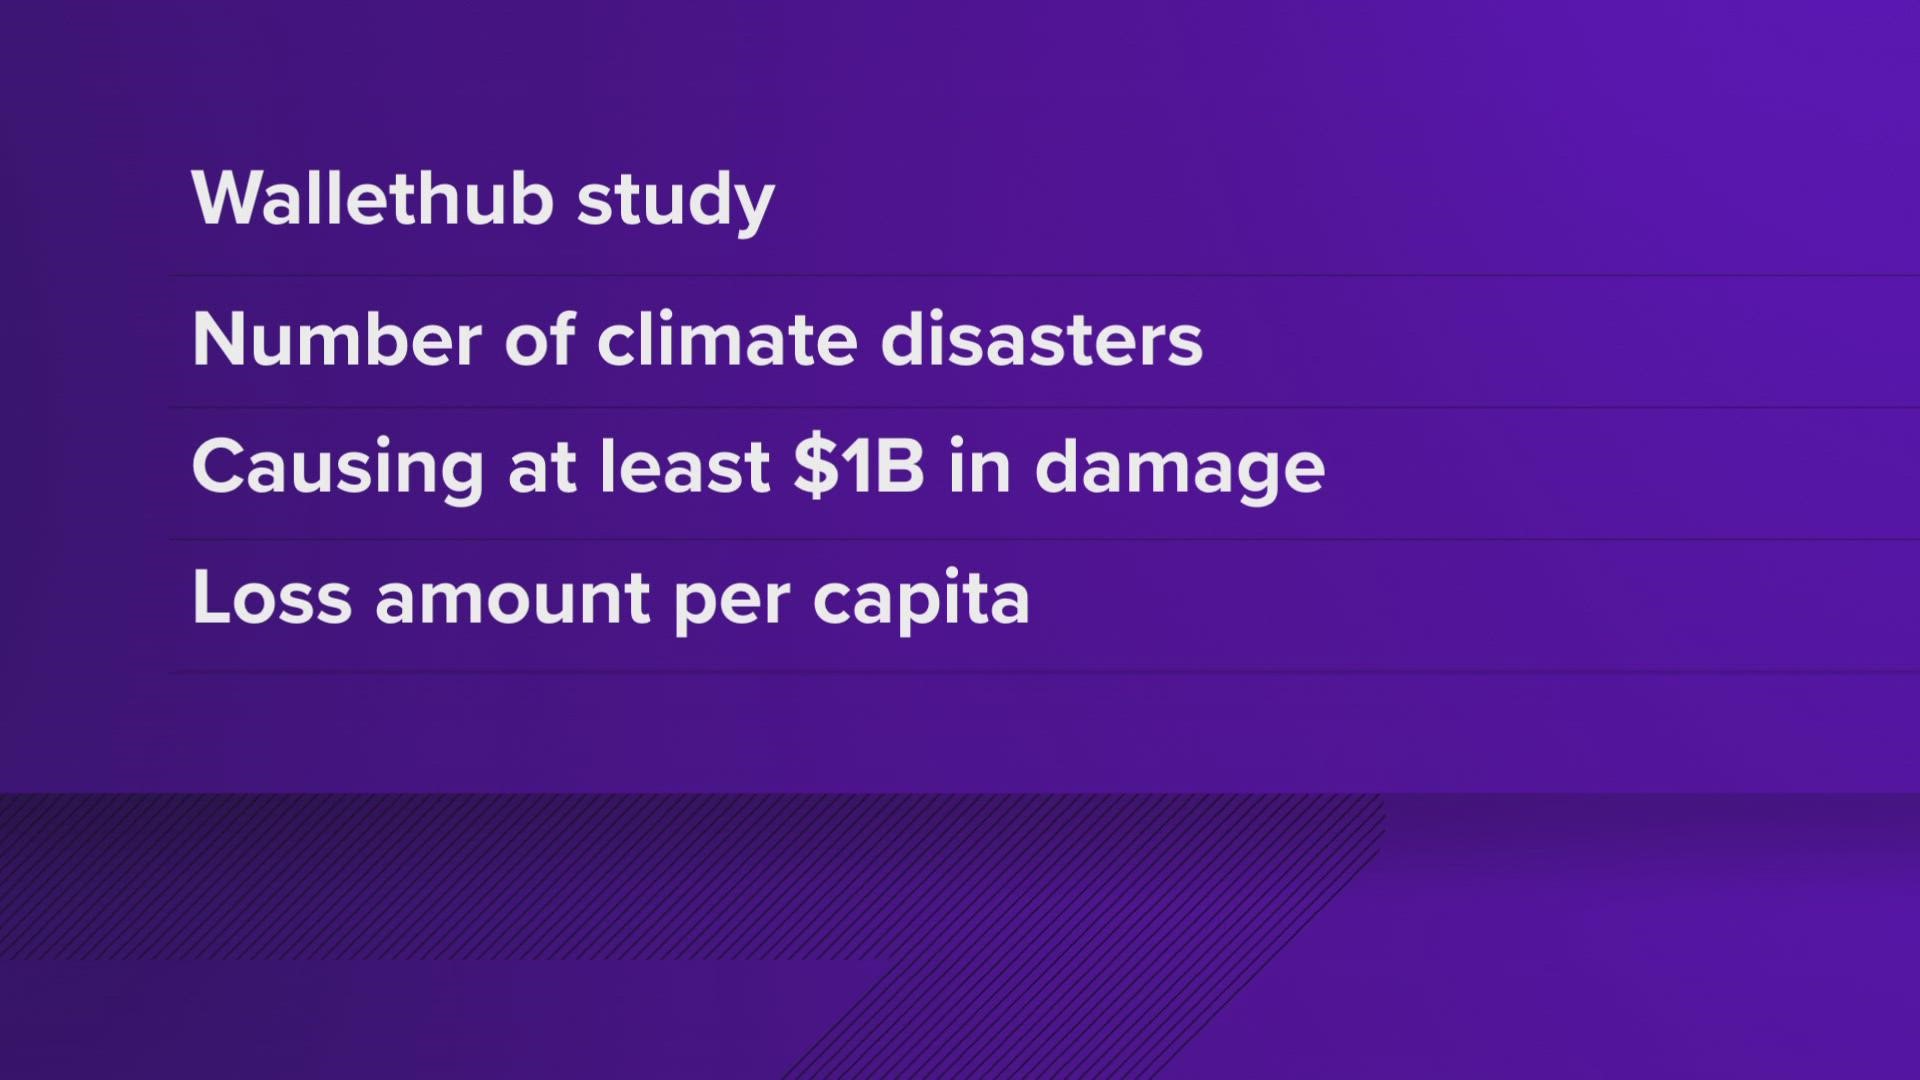 The study took two metrics into account: the number of climate disasters causing at least $1 billion in damage since 1980, as well as the loss amount per capita.